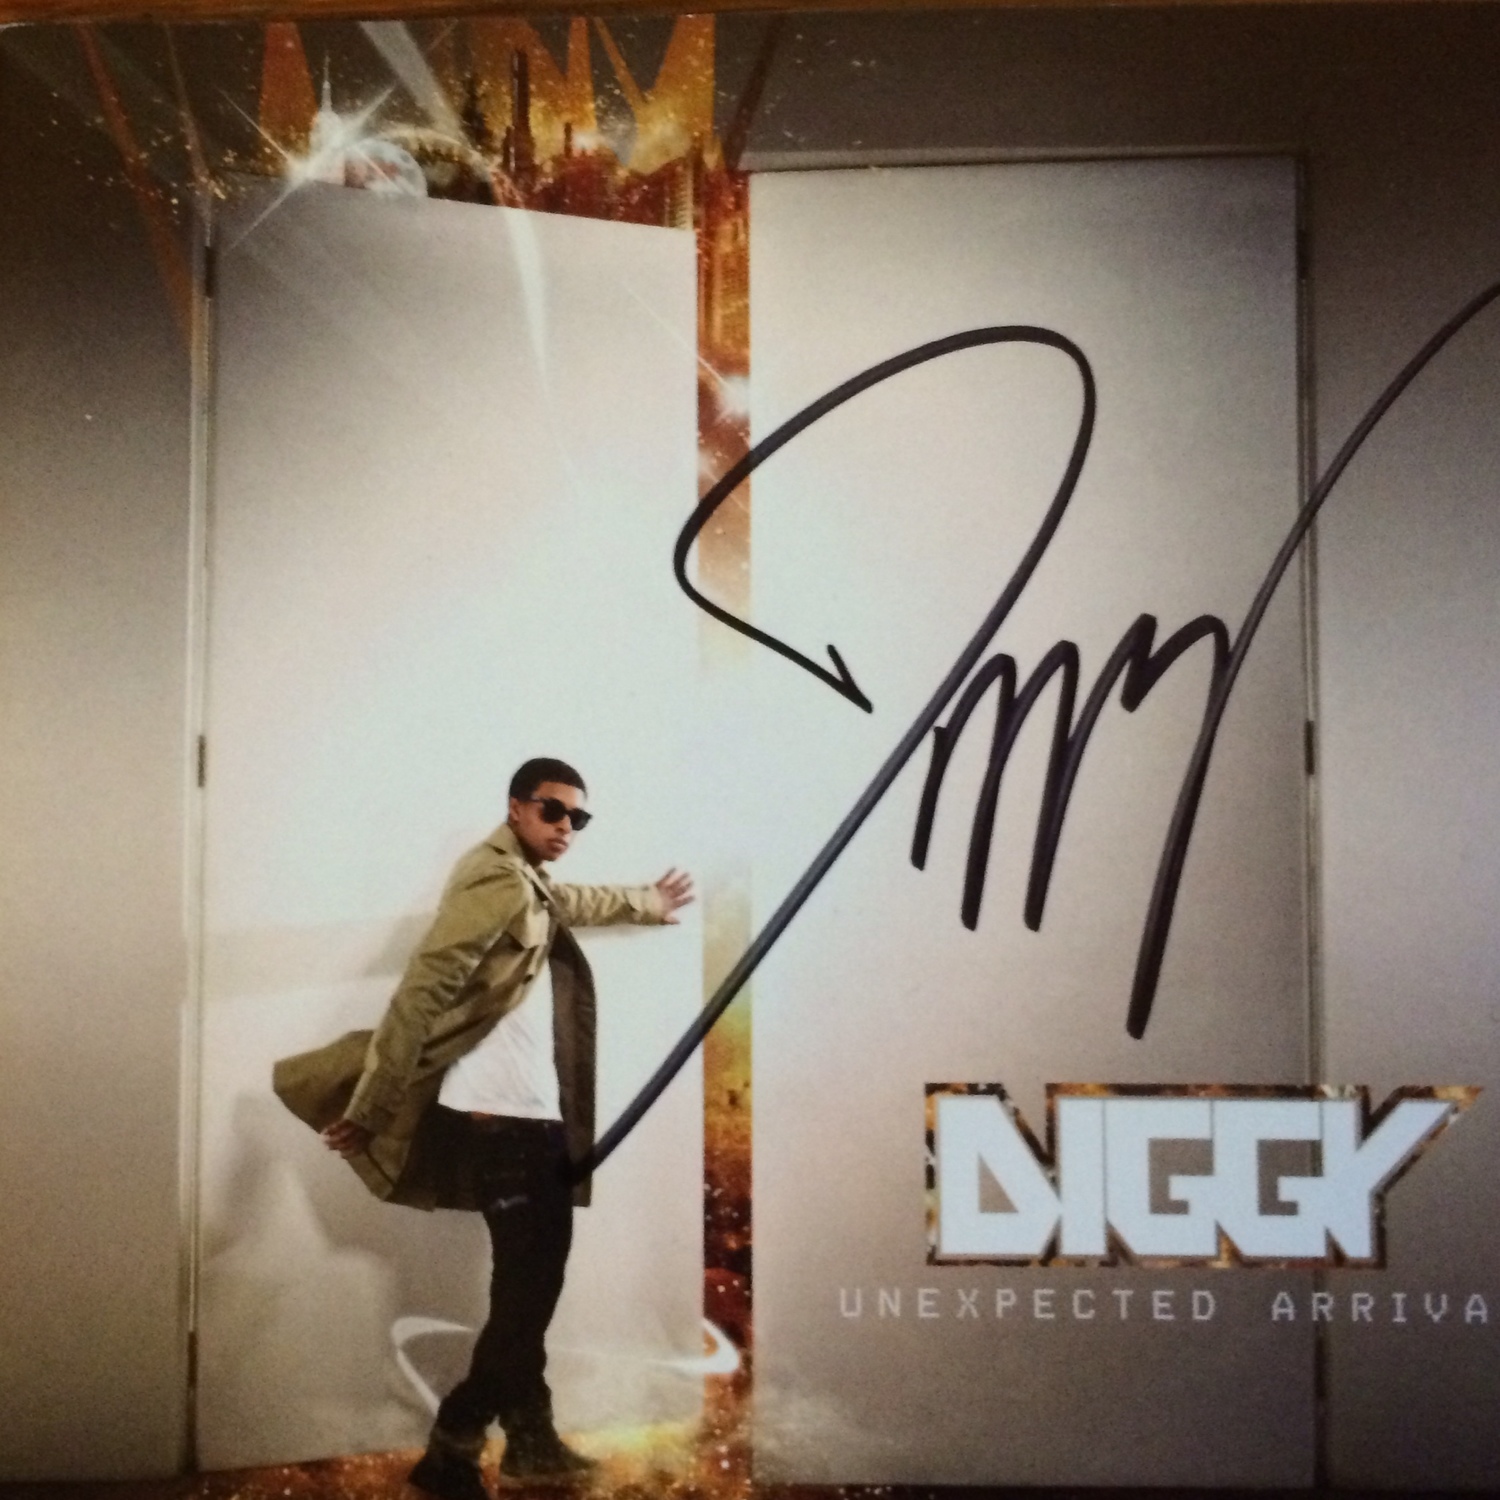 Diggy ...Unexpected - Autographed CD